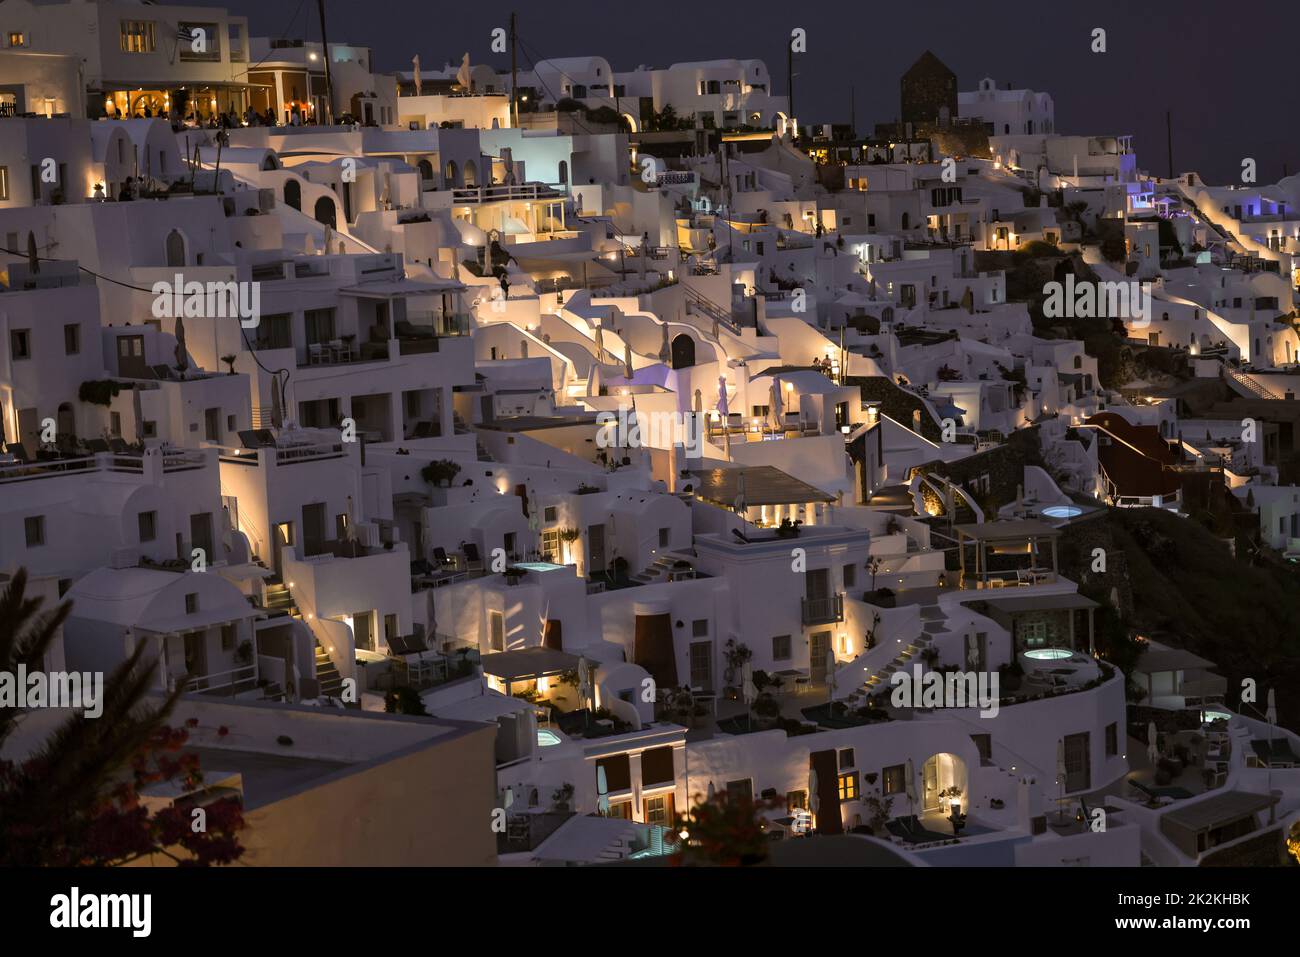 Illuminated whitewashed houses with terraces and pools and a beautiful view in Imerovigli on Santorini island Stock Photo